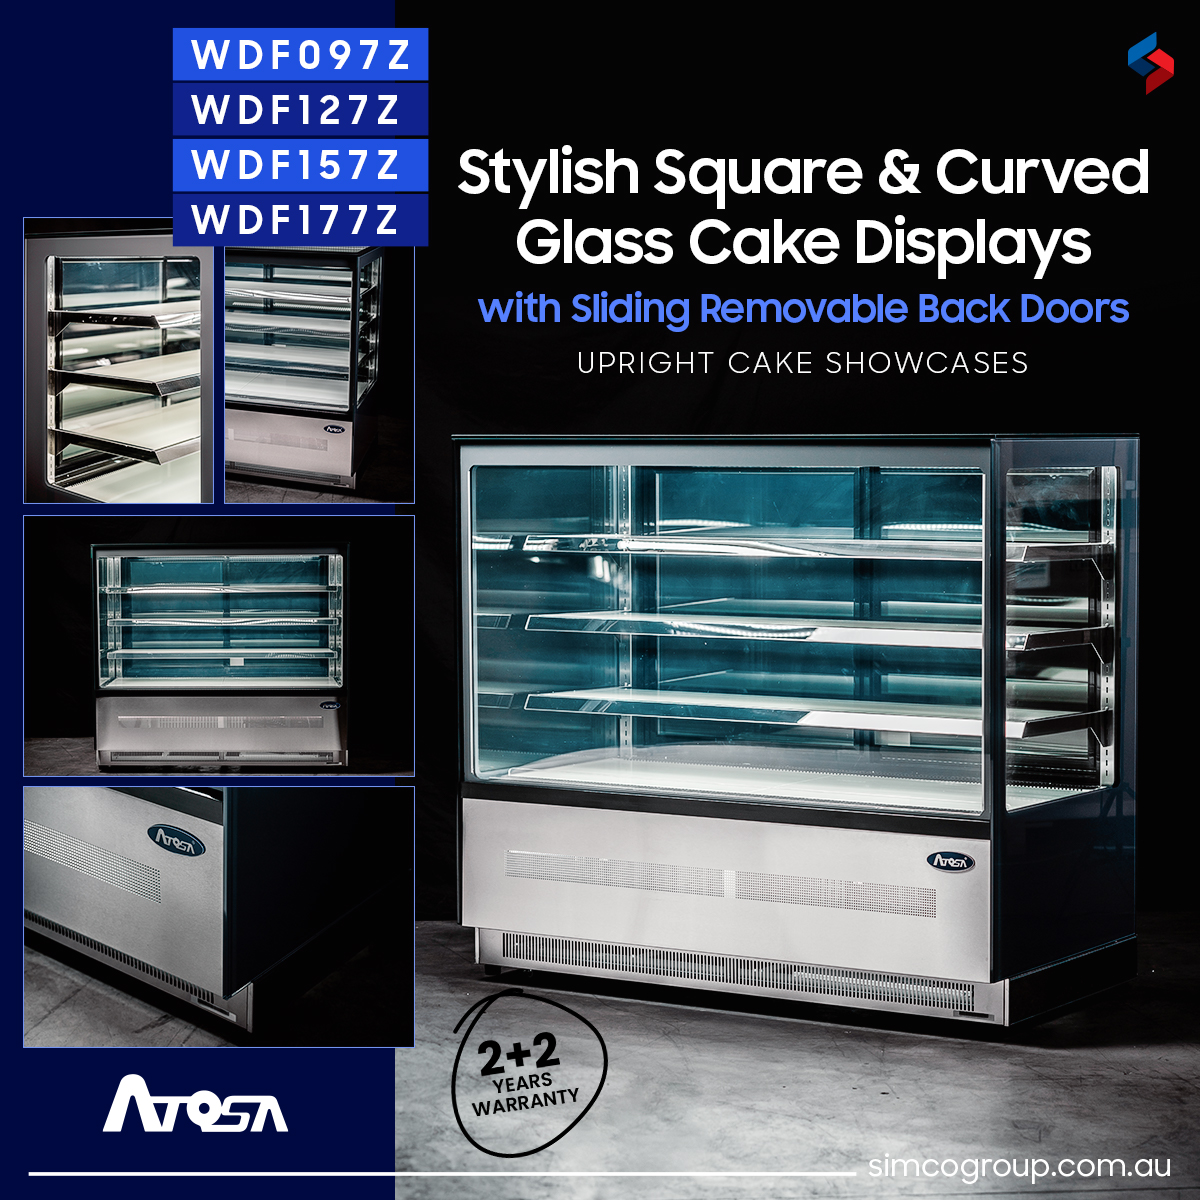 Get easy access to all the delicious #bakery items prepared in your #kitchen!
Buy the beautiful square and curved #glassdisplays with sliding back doors & many other #features.

Learn more - bit.ly/Curved-glass-c…